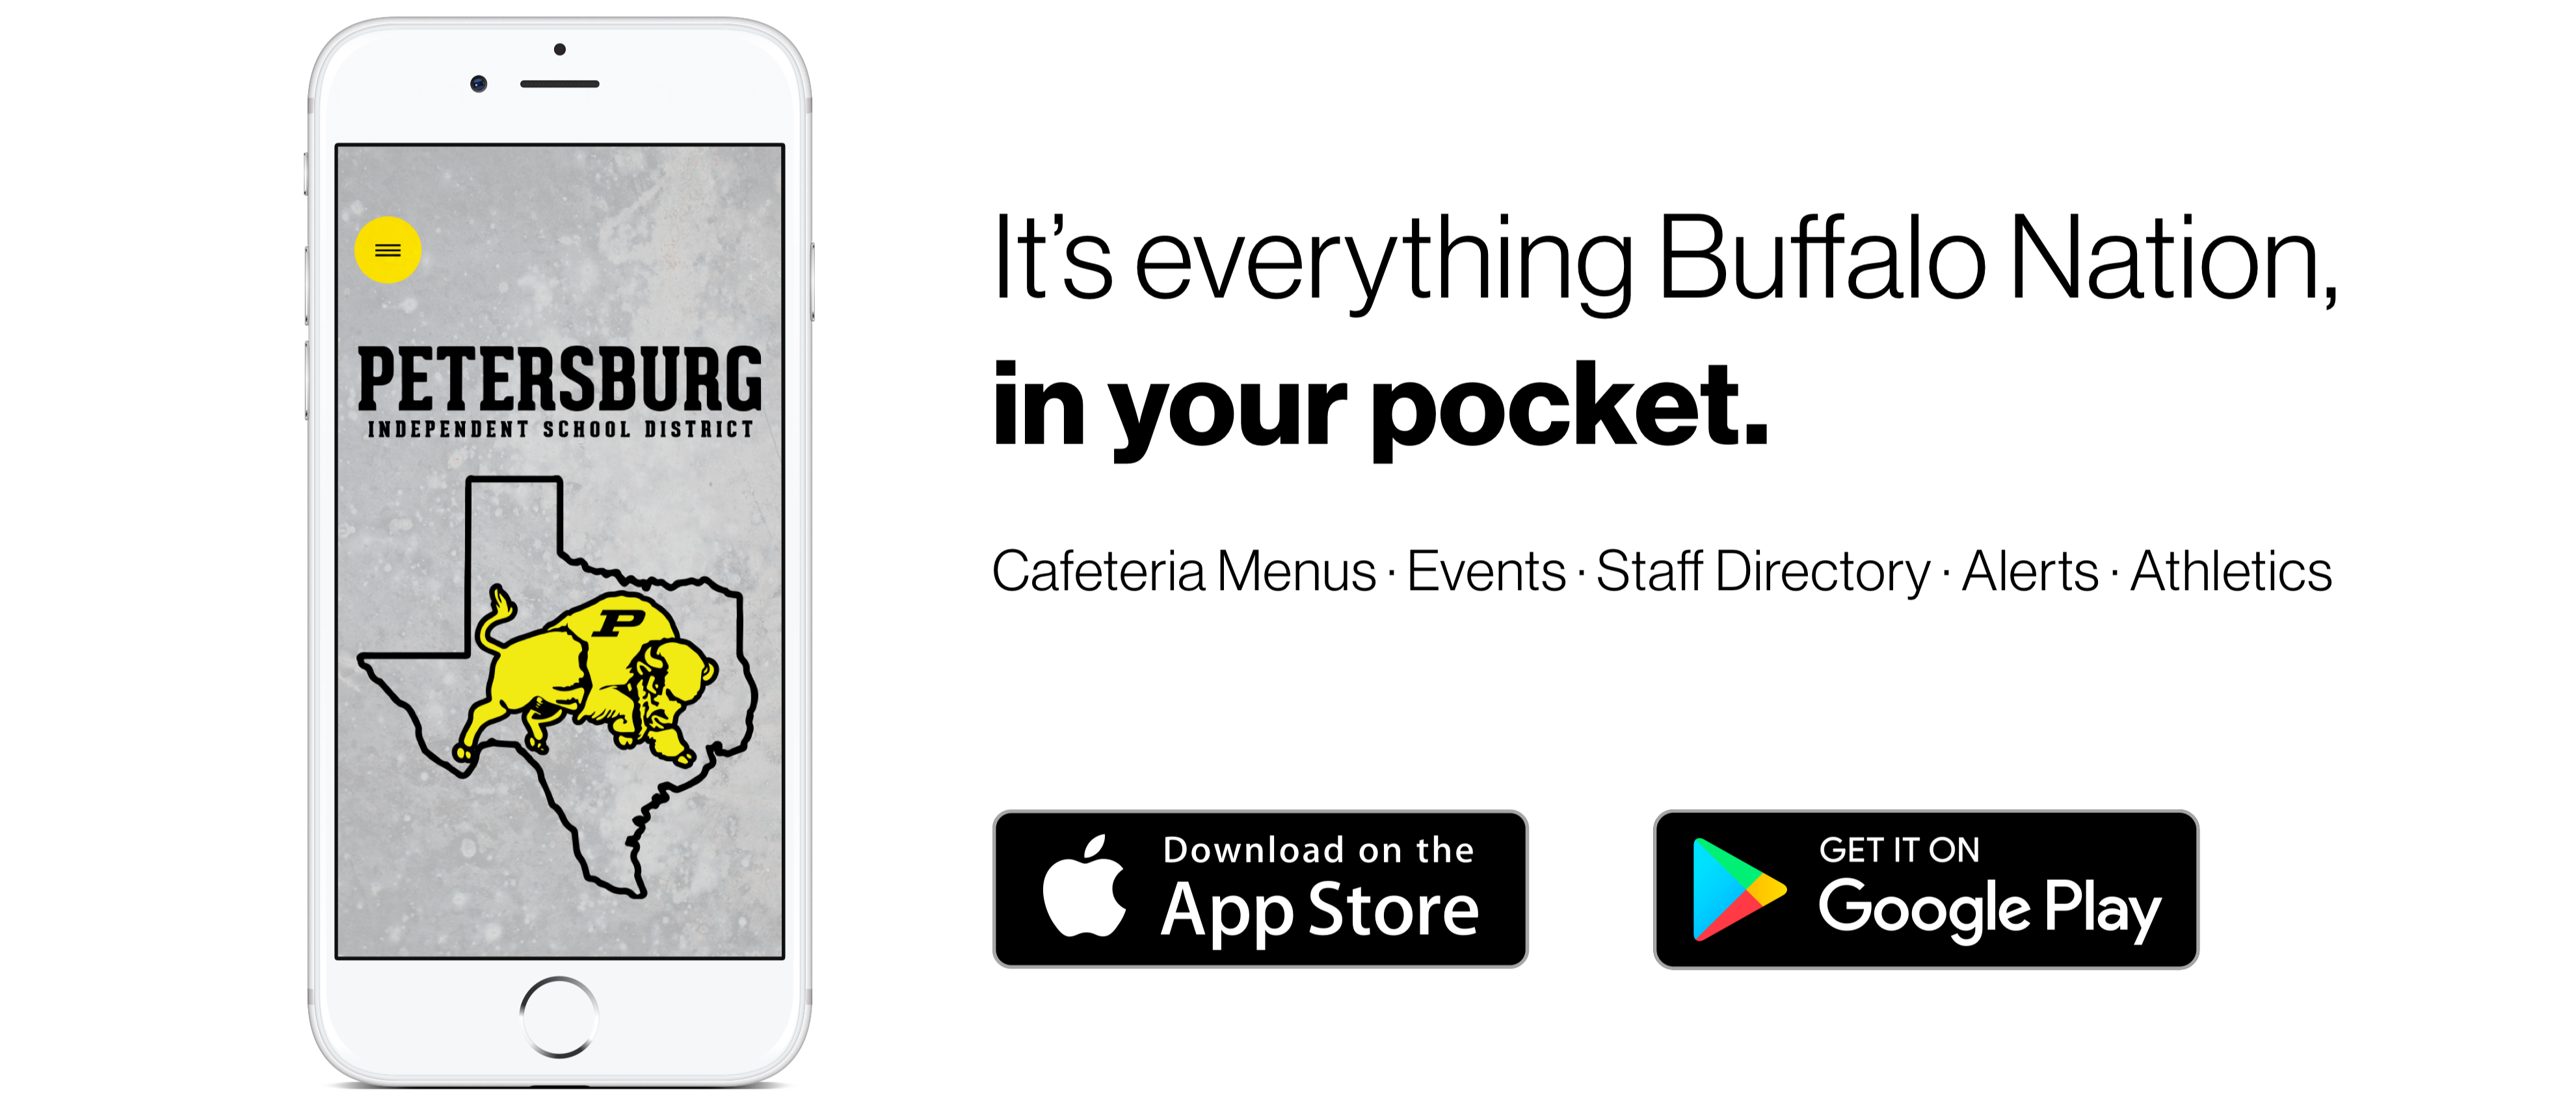 It's everything Buffalo Nation, in your pocket.